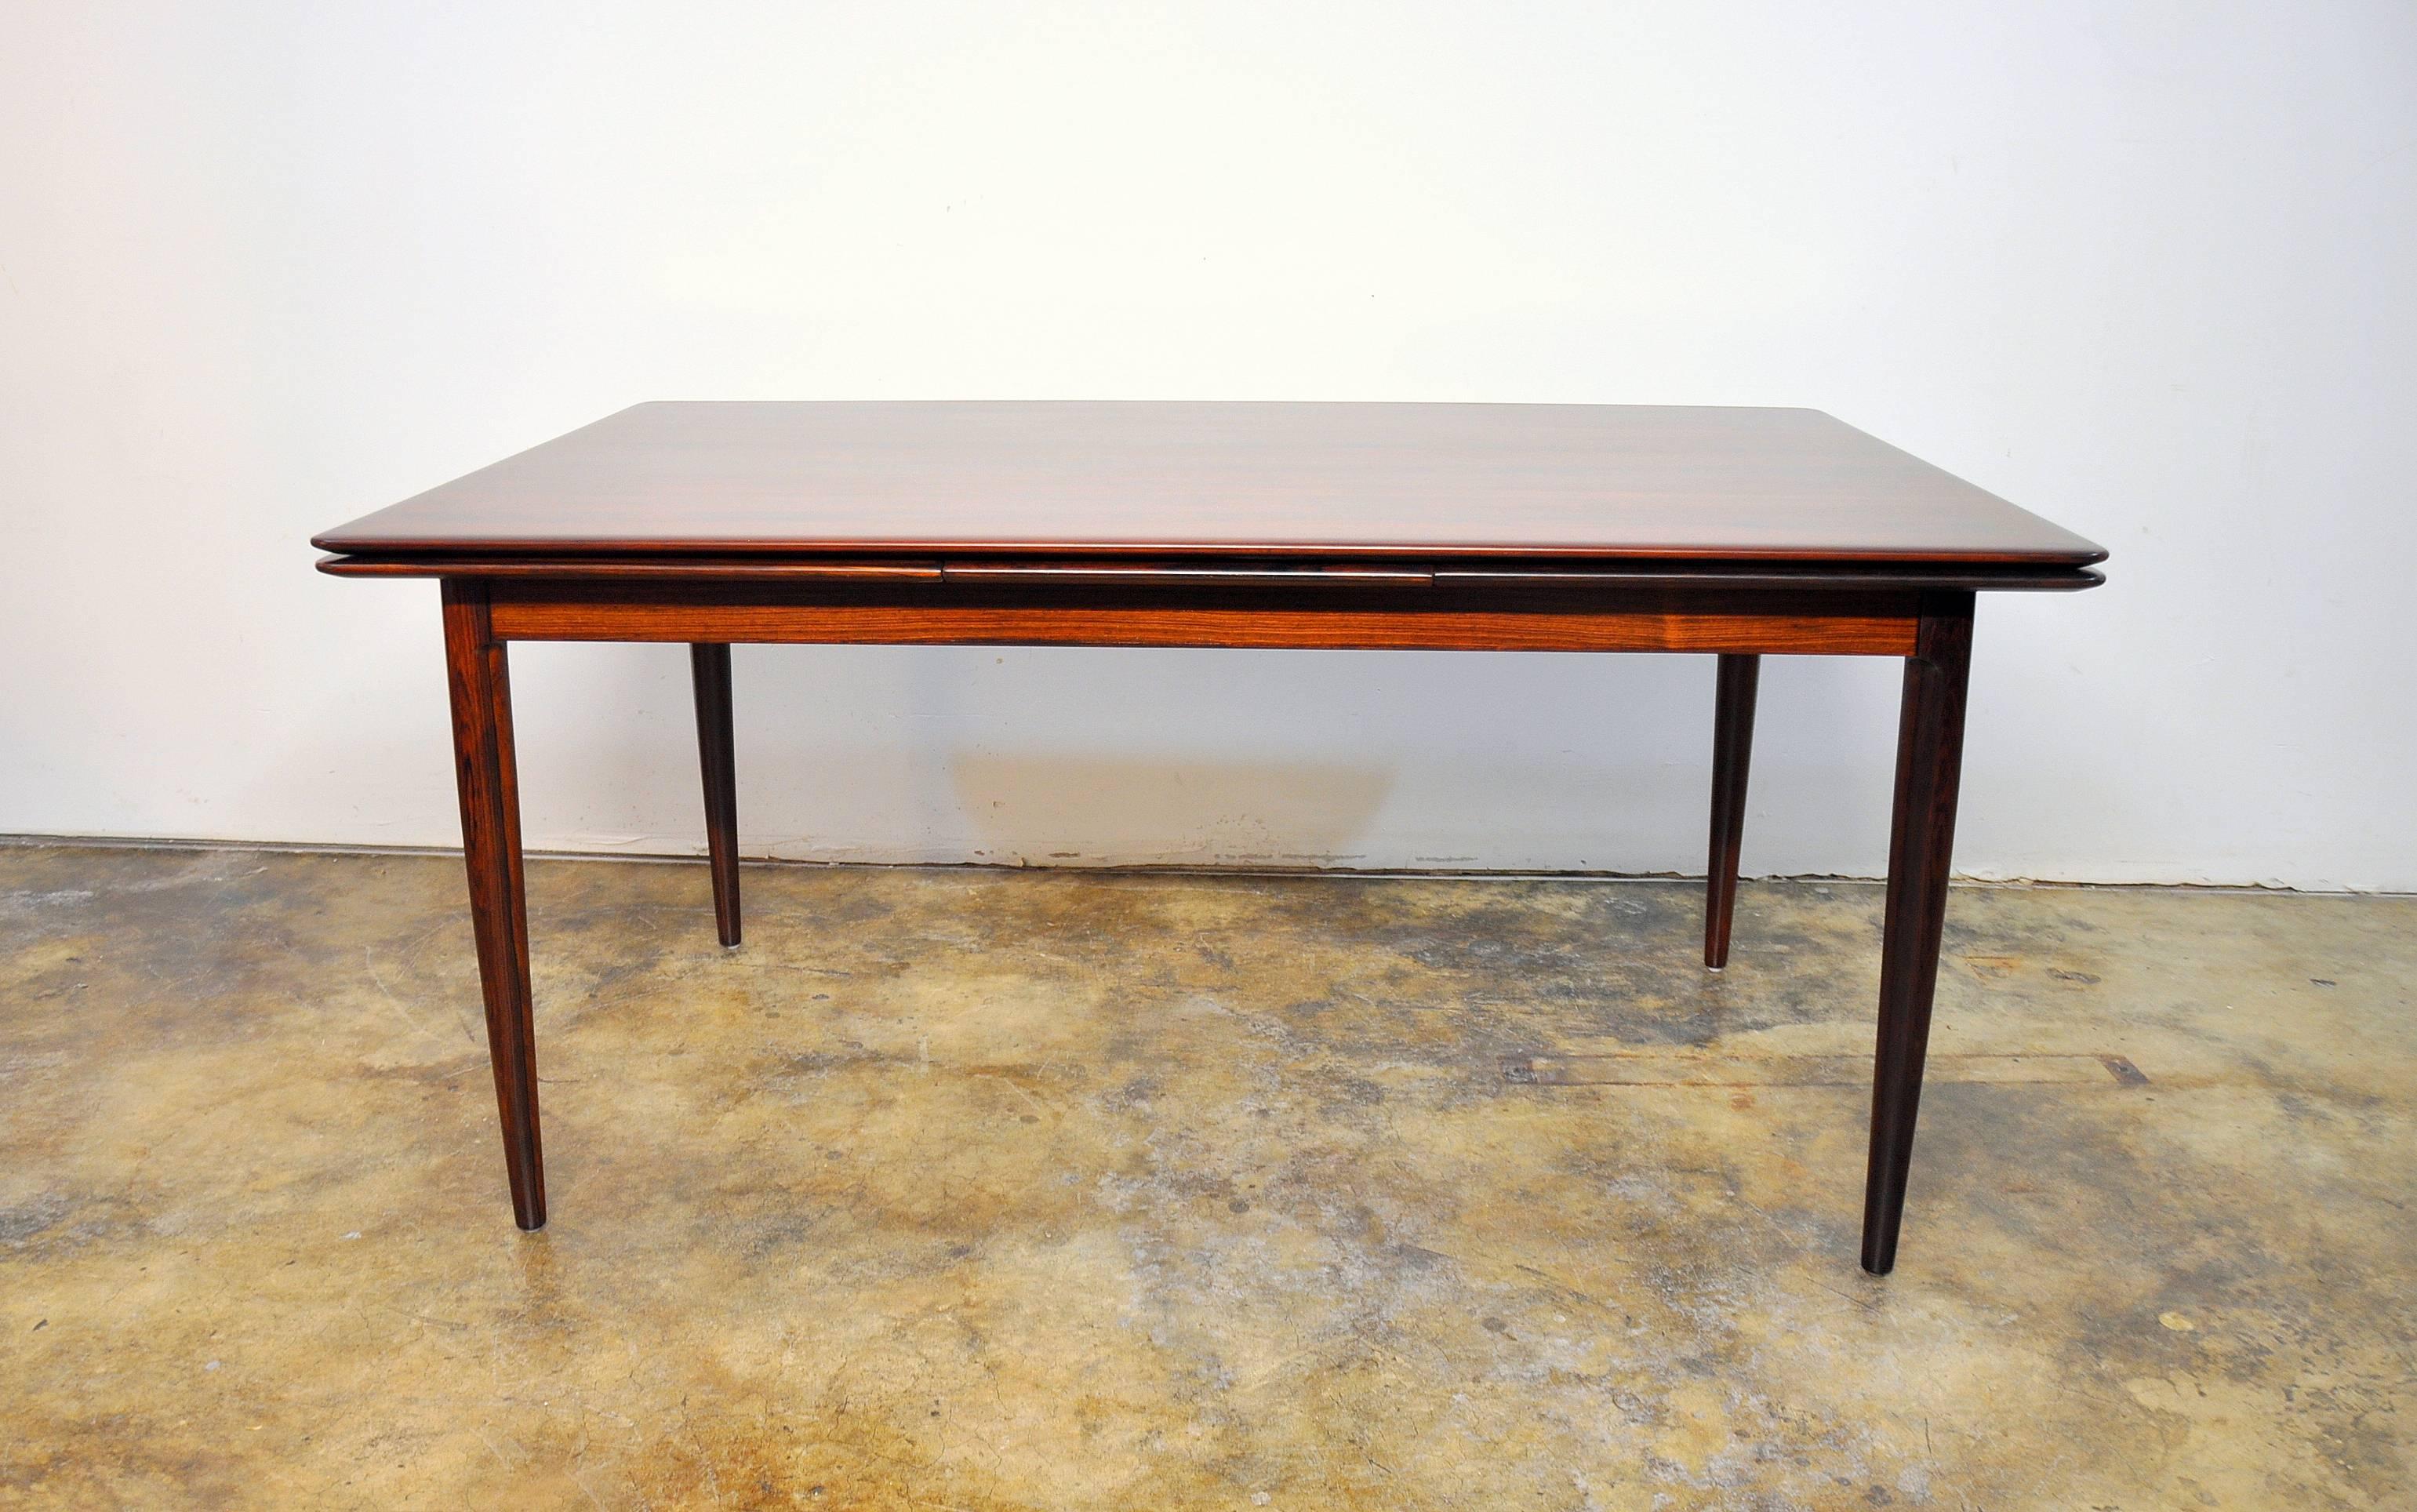 Amazing Mid-Century Danish modern rosewood expandable dining table, dating from the 1960s. The table has a draw leaf design and can extend to 104". It has two leaf extensions that draw out from their original position tucked underneath the main